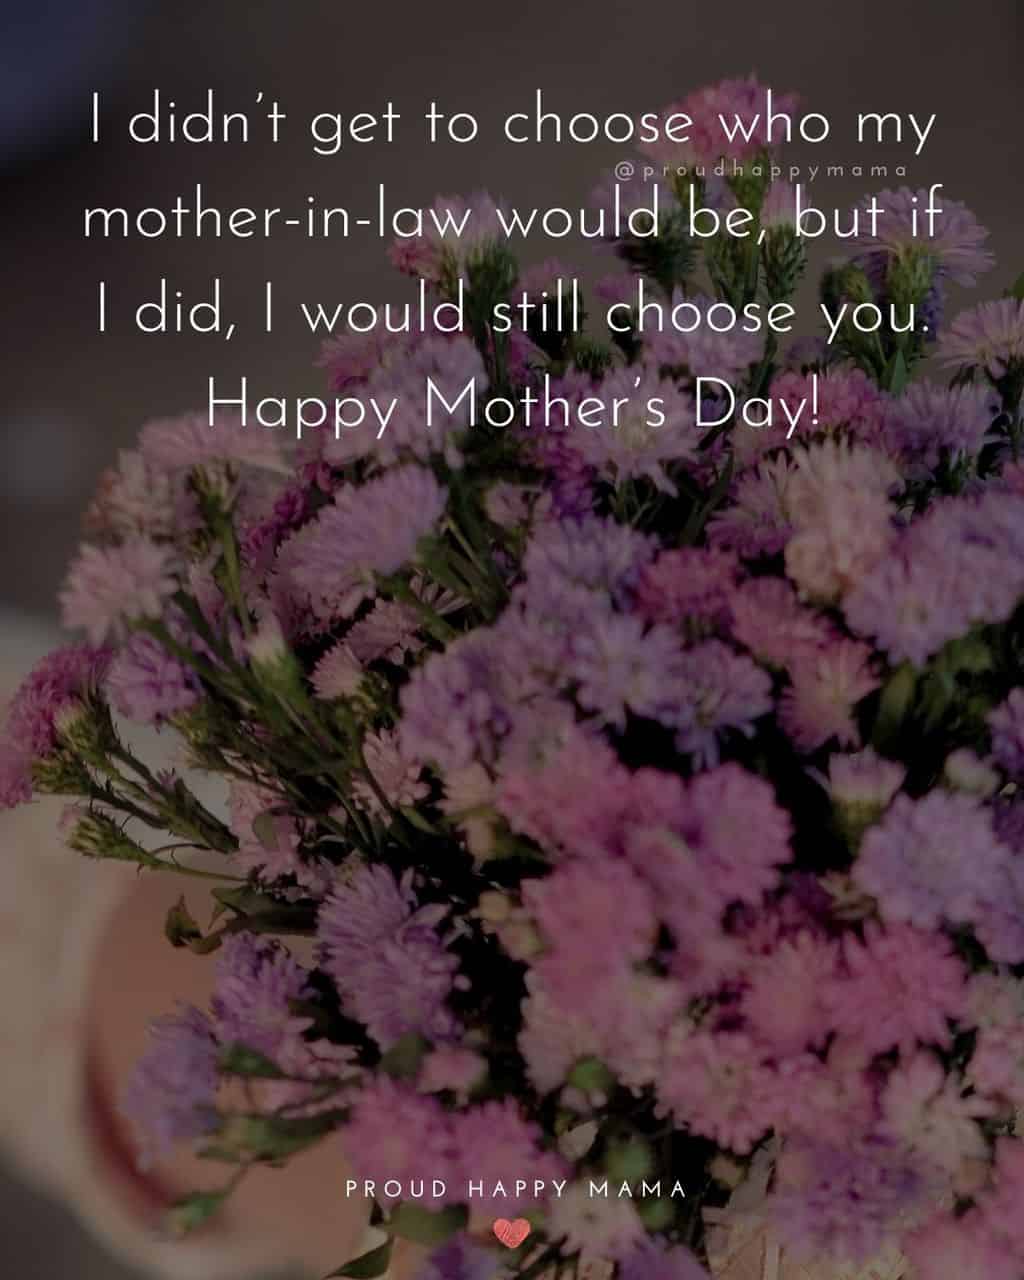 Happy Mothers Day Quotes For Mother In Law - I didn’t get to choose who my mother in law would be, but if I did, I would still choose you.